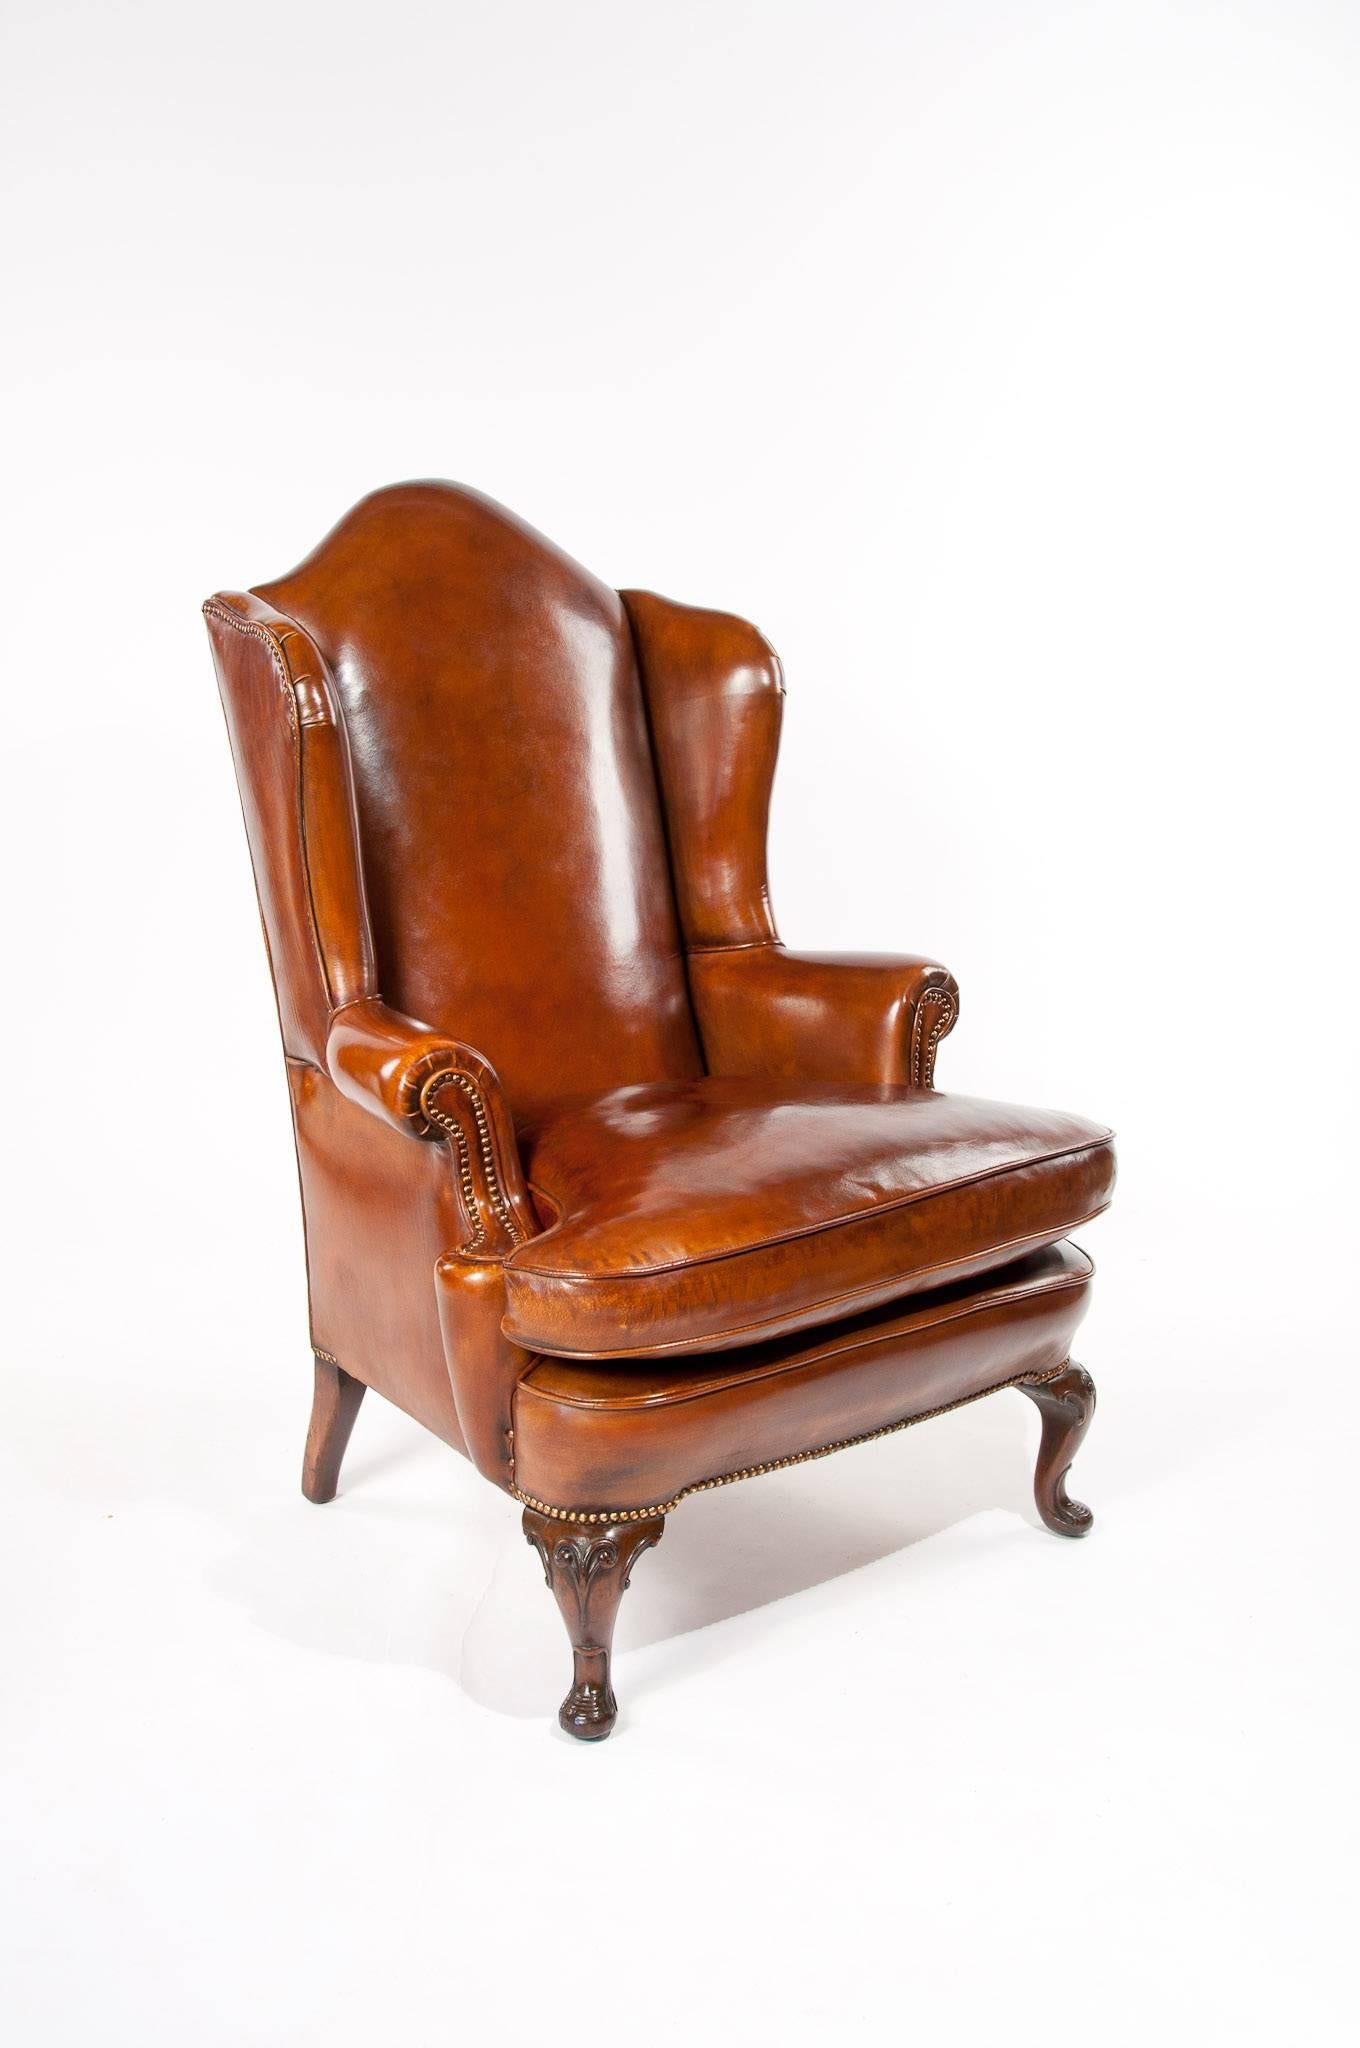 Superb quality antique walnut leather wing chair, mid-19th century having wonderful proportions.
A very good quality walnut leather upholstered wing chair of good proportions dating to circa 1850. This antique leather wing chair is of fine quality